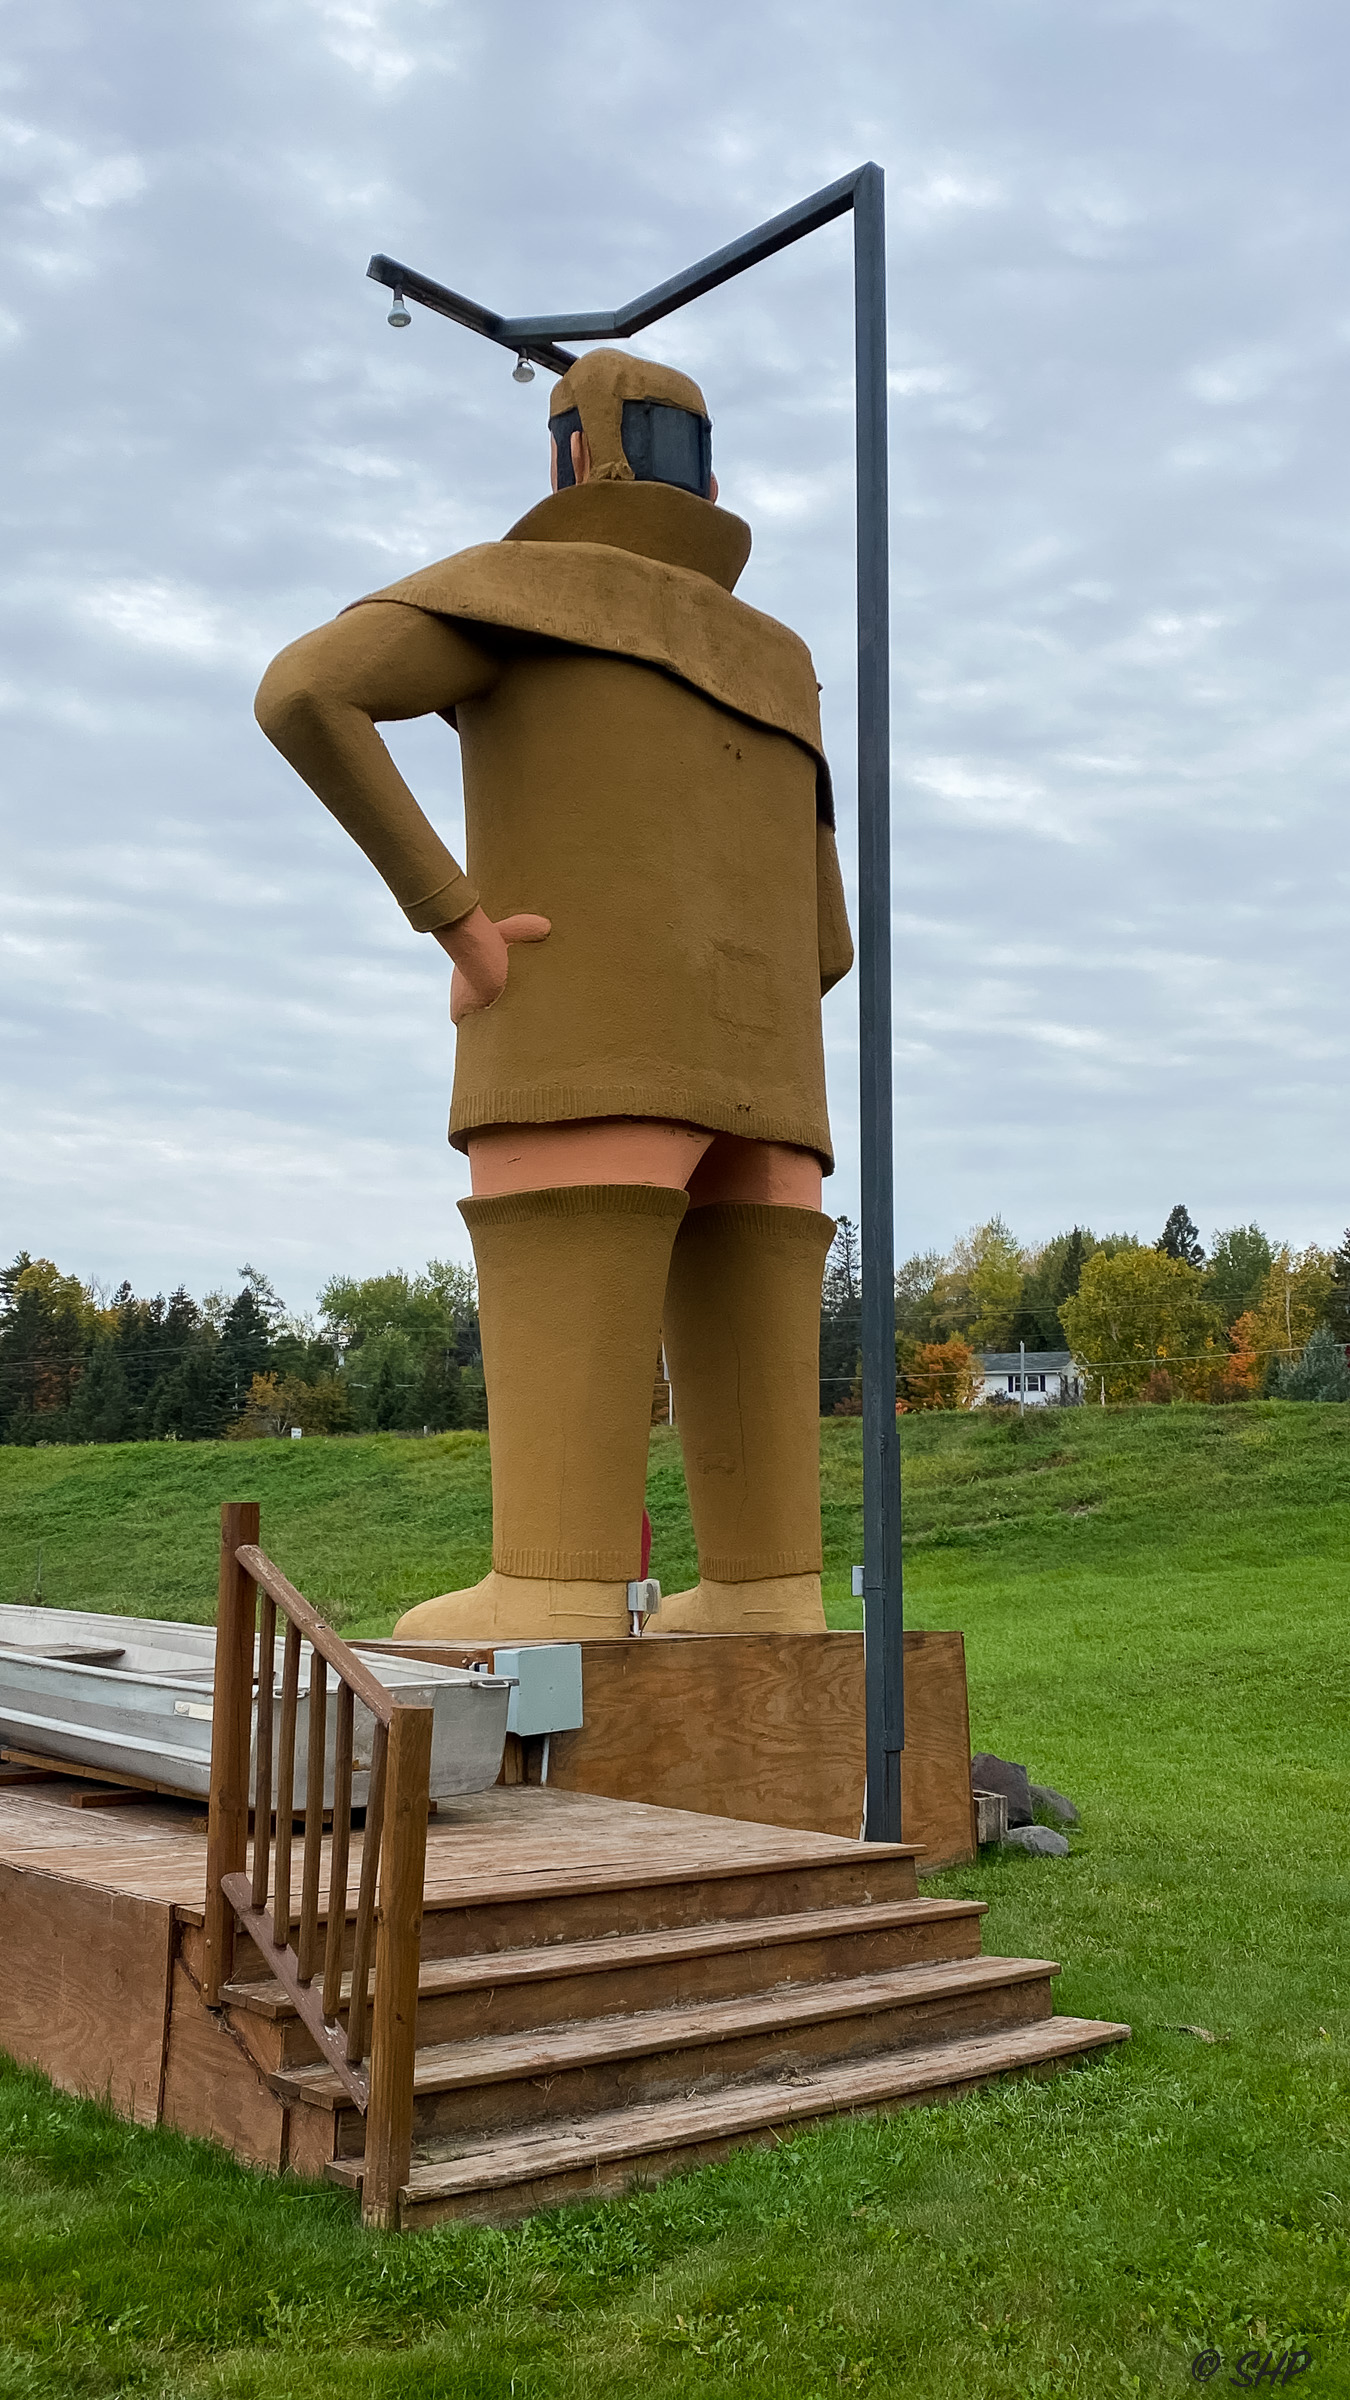 Pierre the Pantless statue in MN